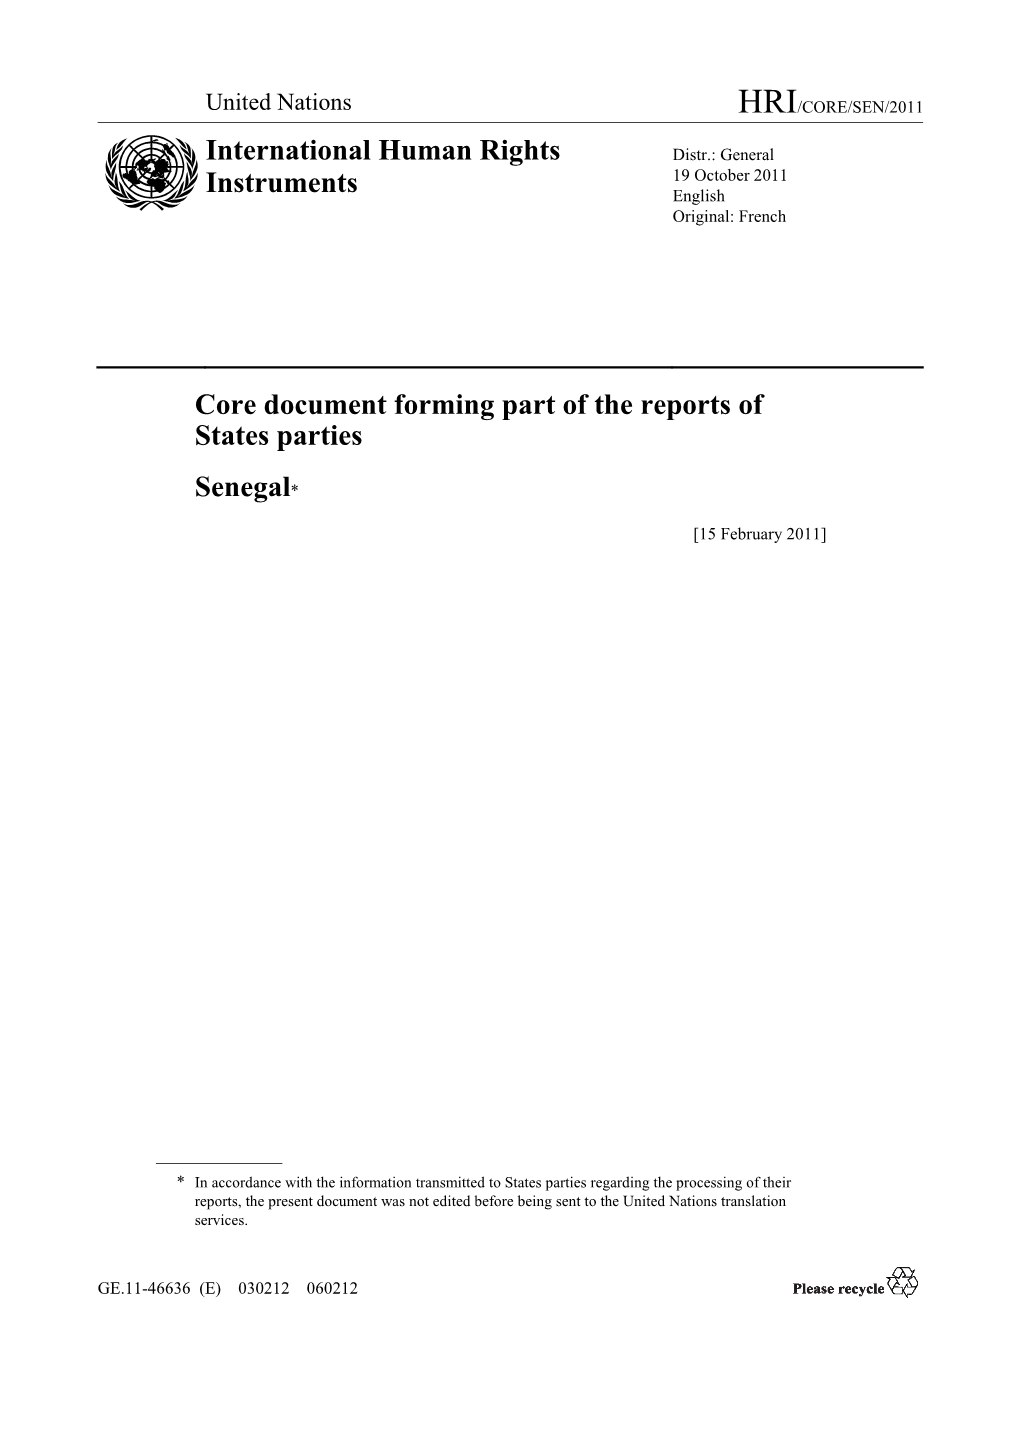 Core Document Forming Part of the Reports of States Parties Senegal